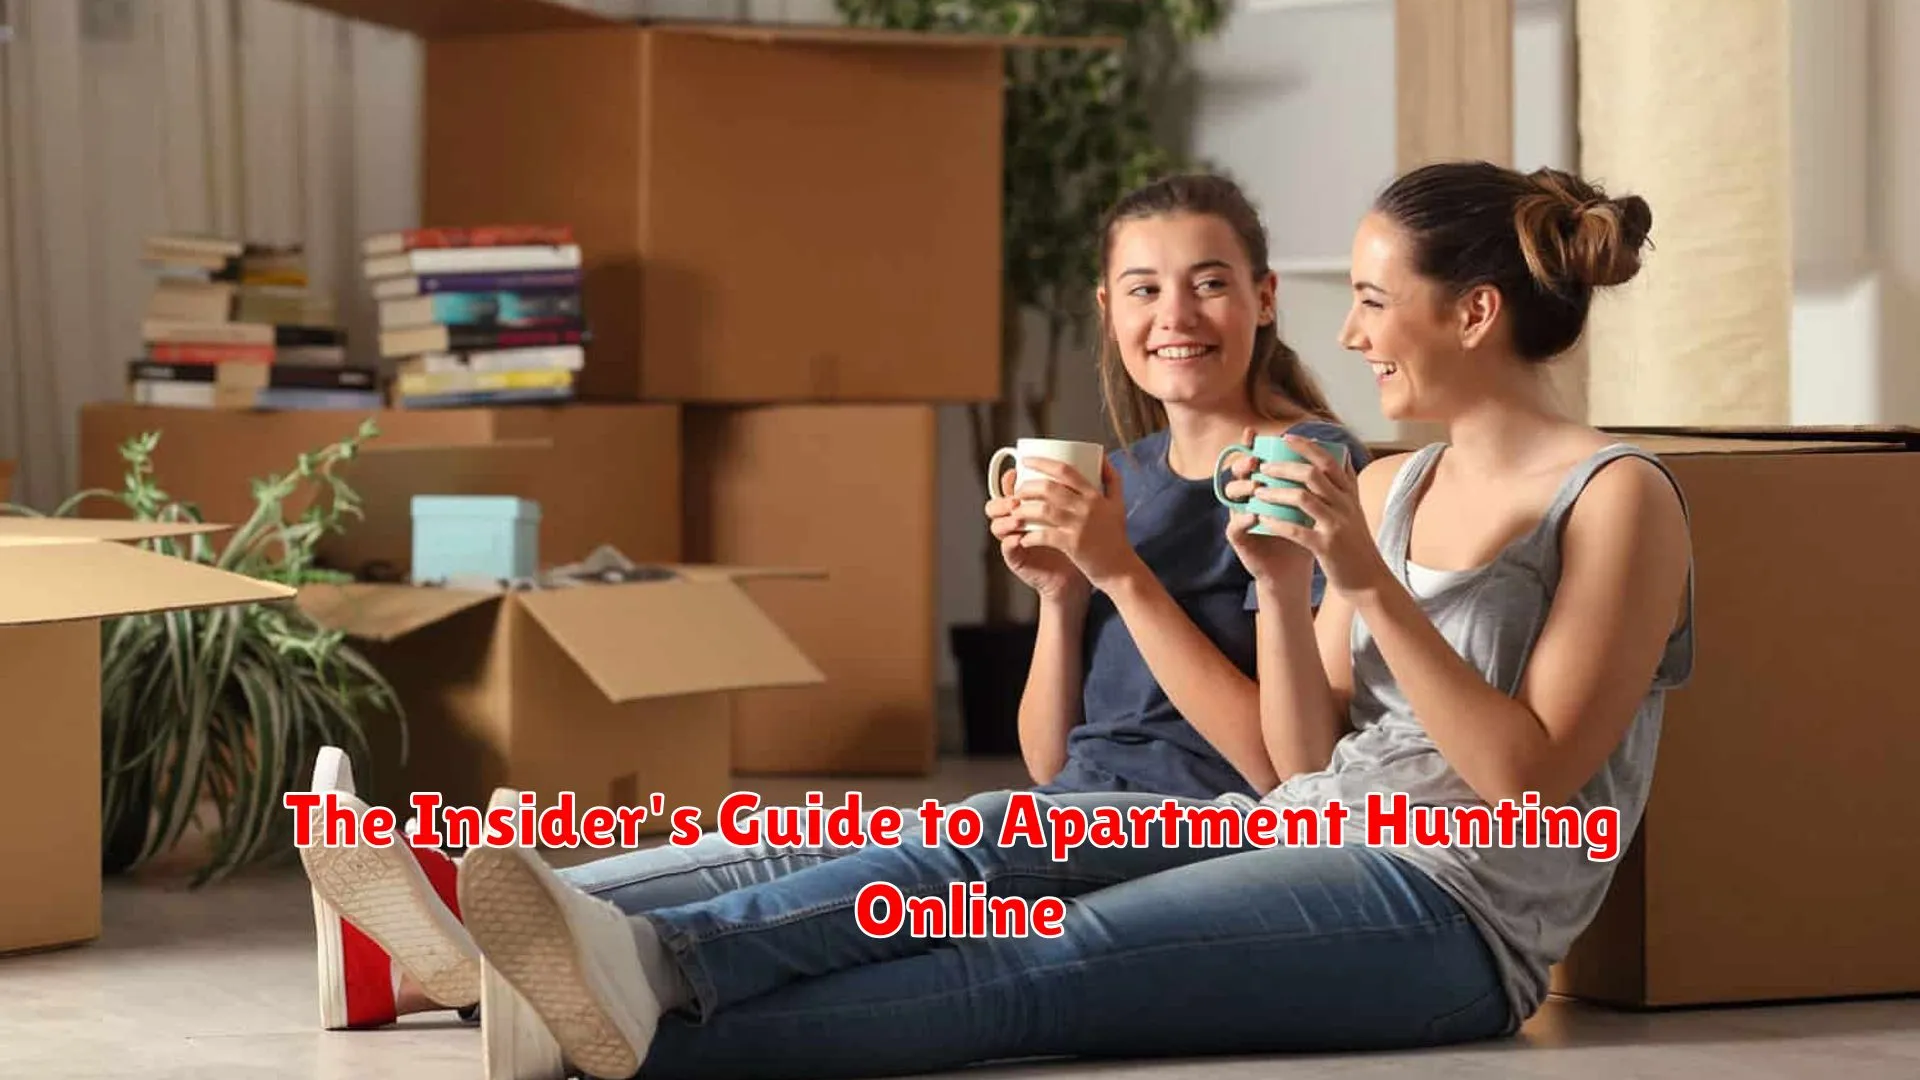 The Insider's Guide to Apartment Hunting Online